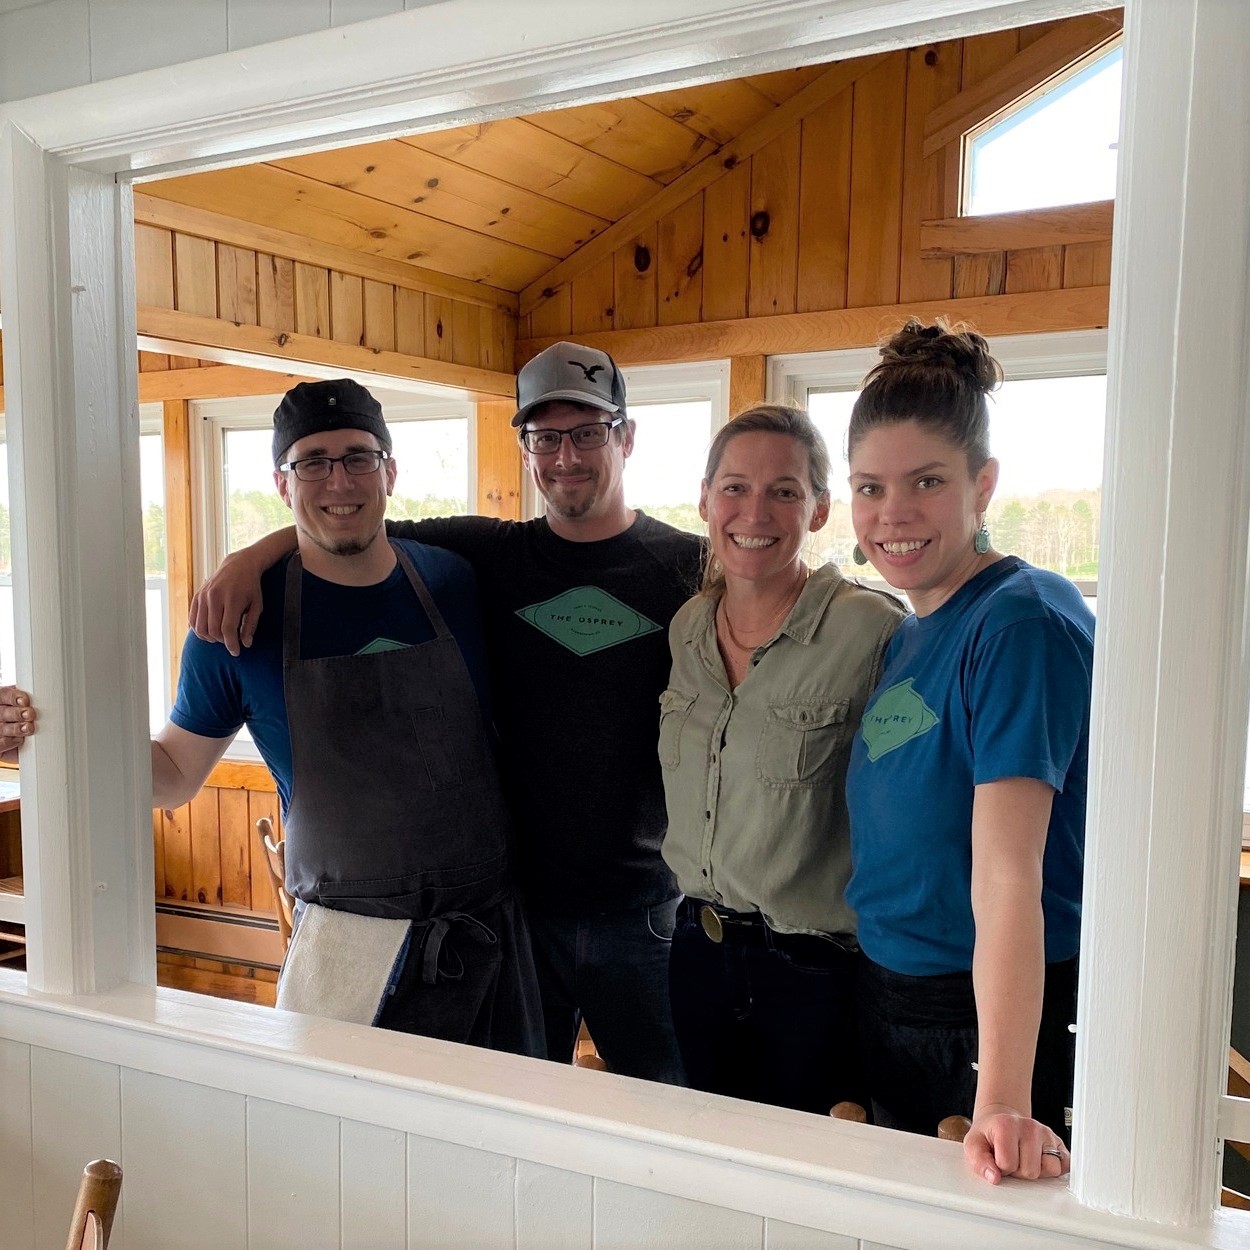 Group Photo of The Osprey Resturant, two white men and two white women with their arms around each other inside a restaurant doorway.